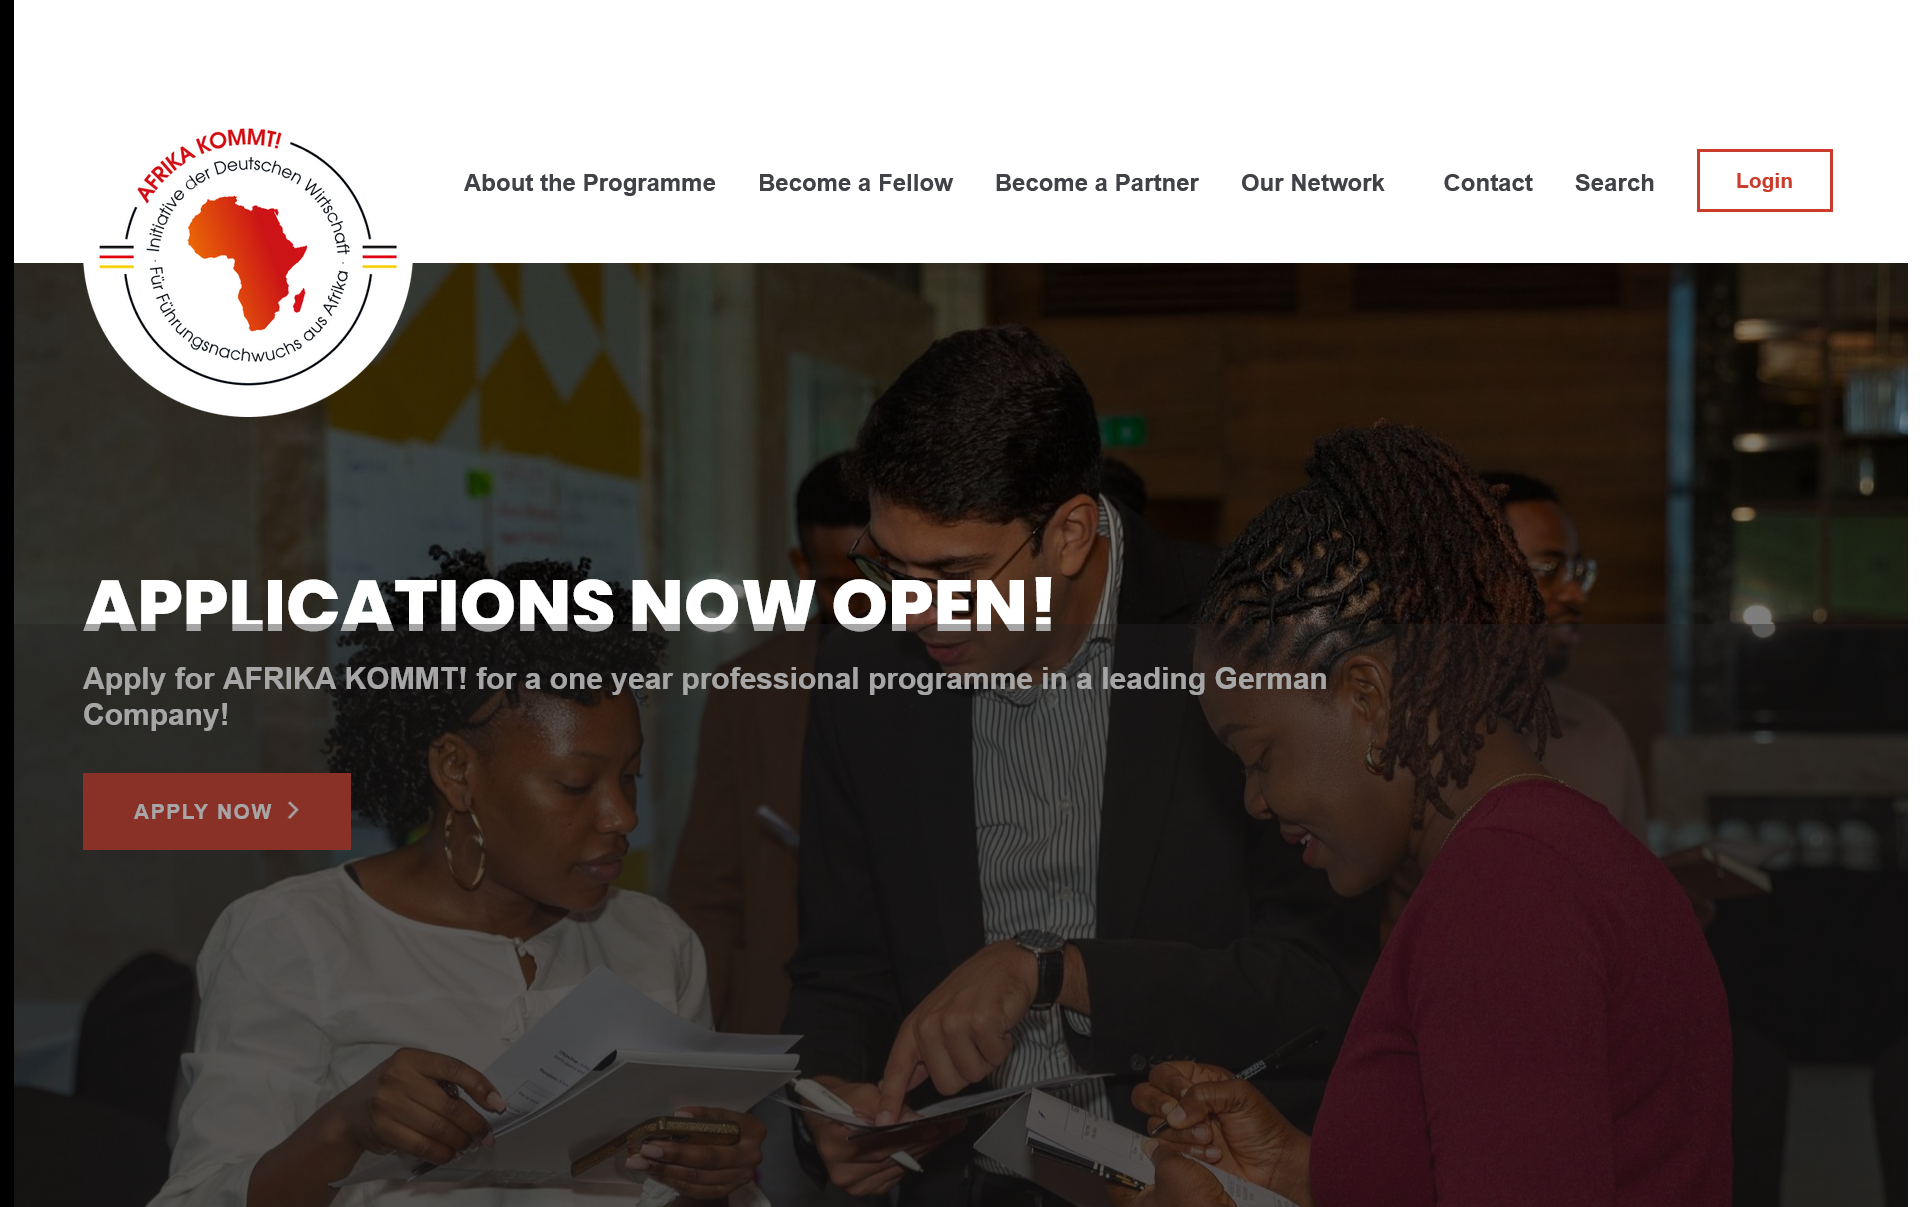 Fully Funded AFRIKA KOMMT Fellowship Program for Young Professionals